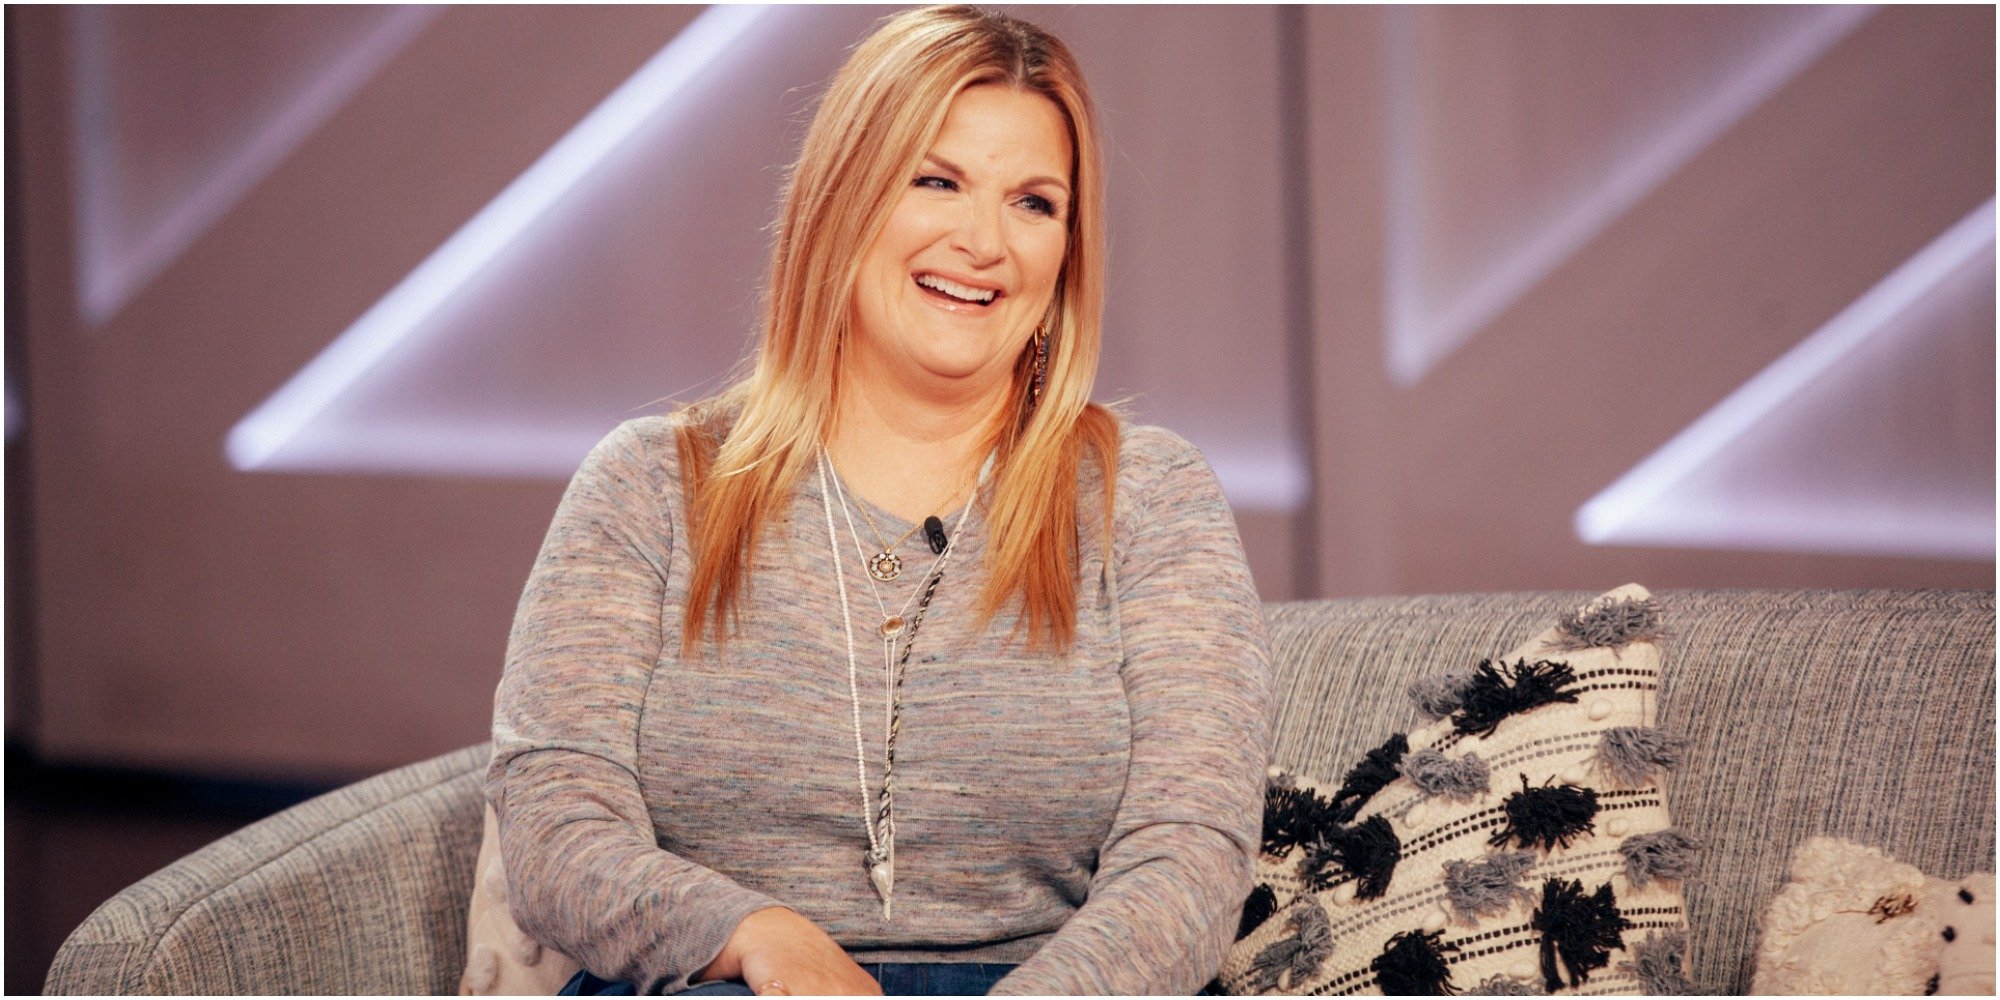 Trisha Yearwood sit on a sofa during an appearance on 'The Kelly Clarkson Show.'